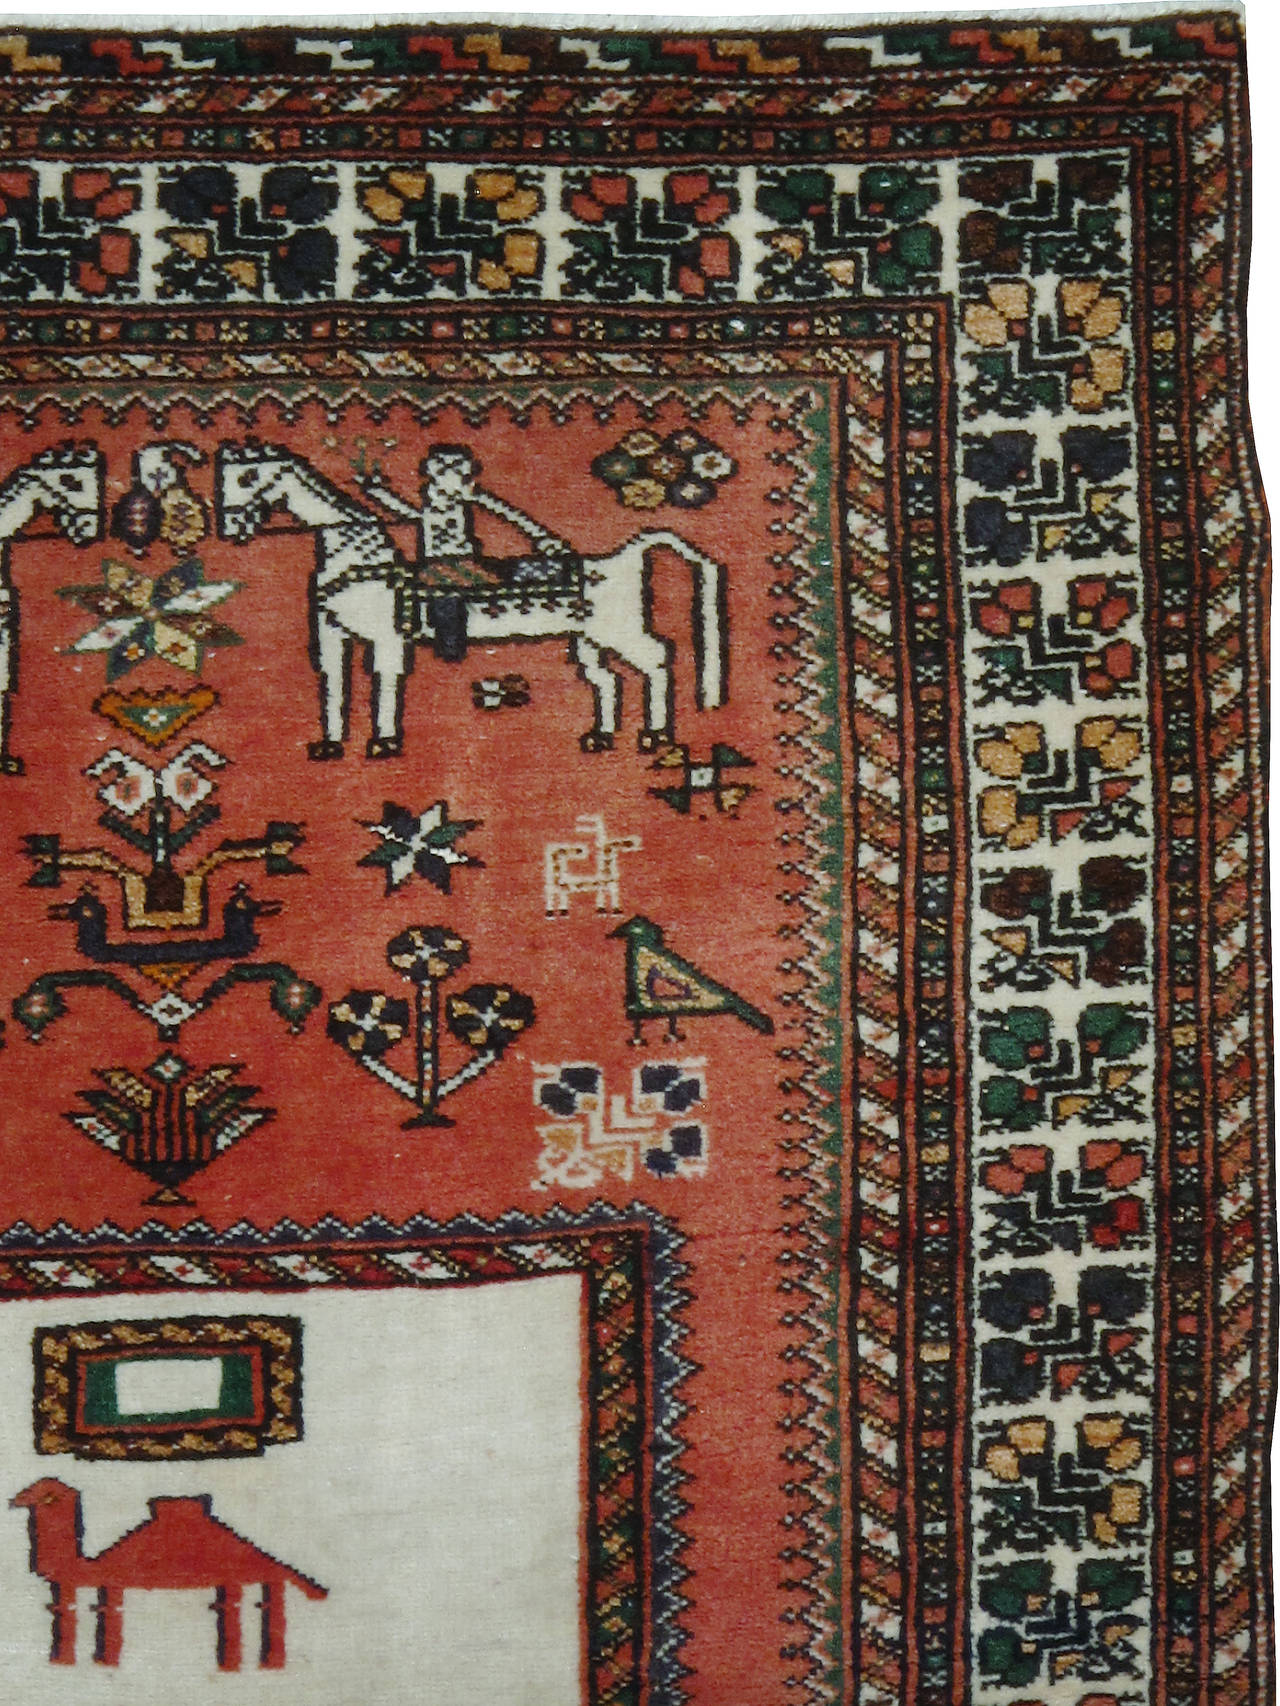 A vintage northwest Persian carpet from the second quarter of the 20th century with a pictorial design.